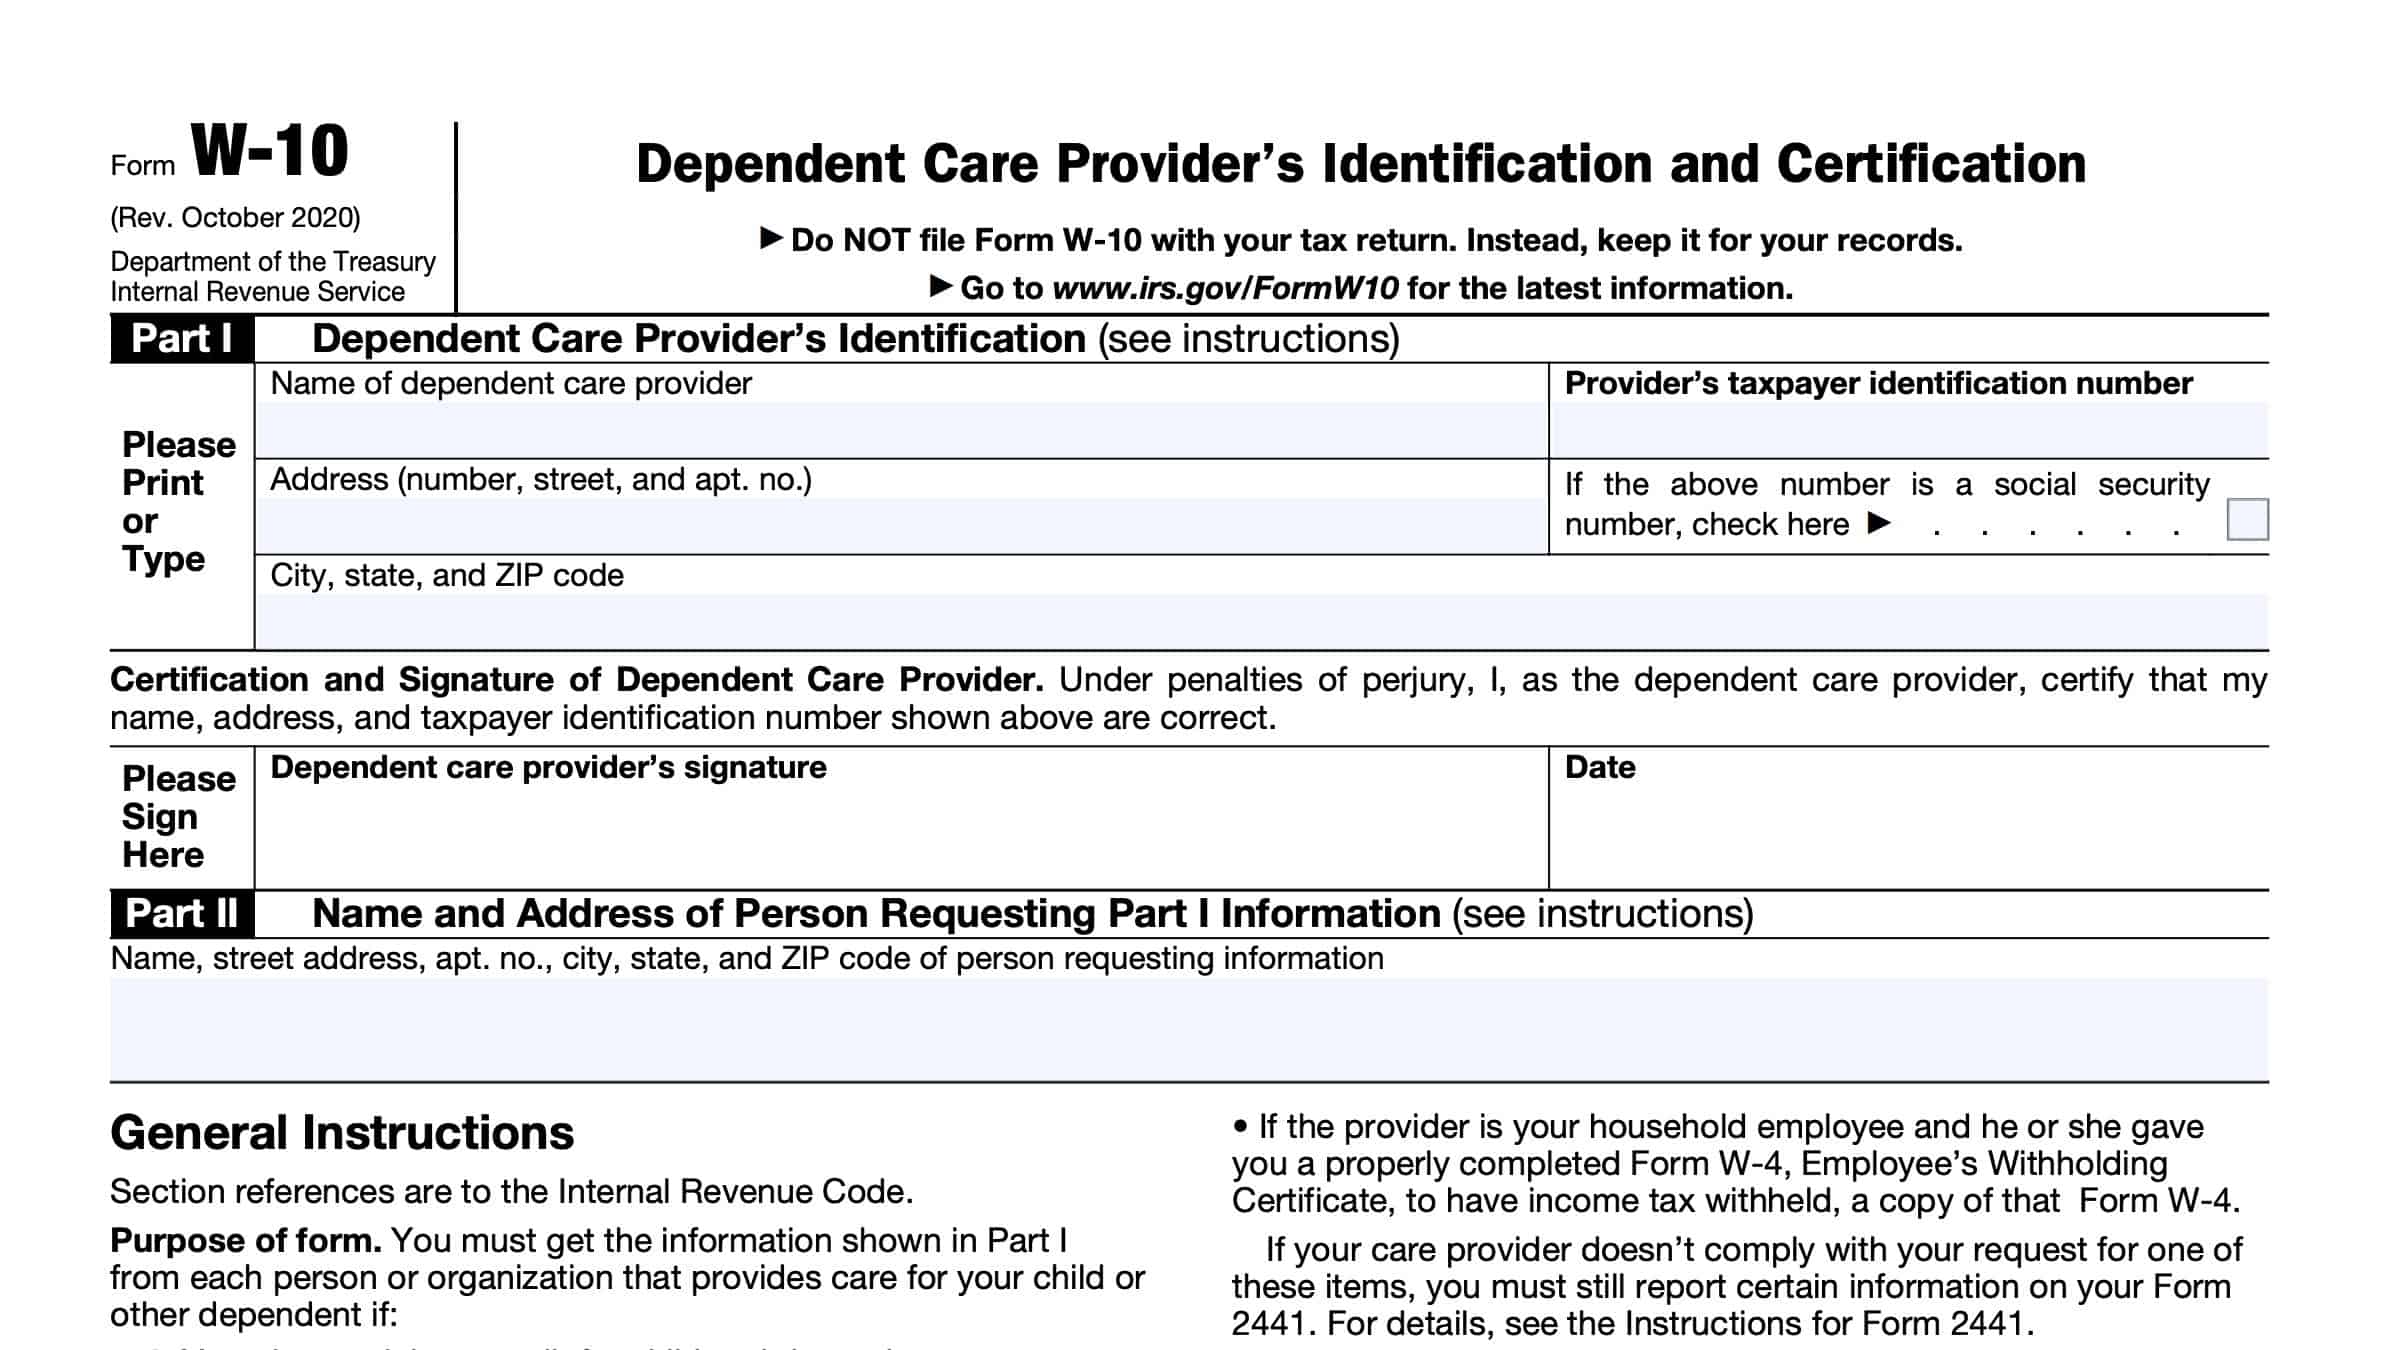 irs form w-10, dependent care provider's identification and certification